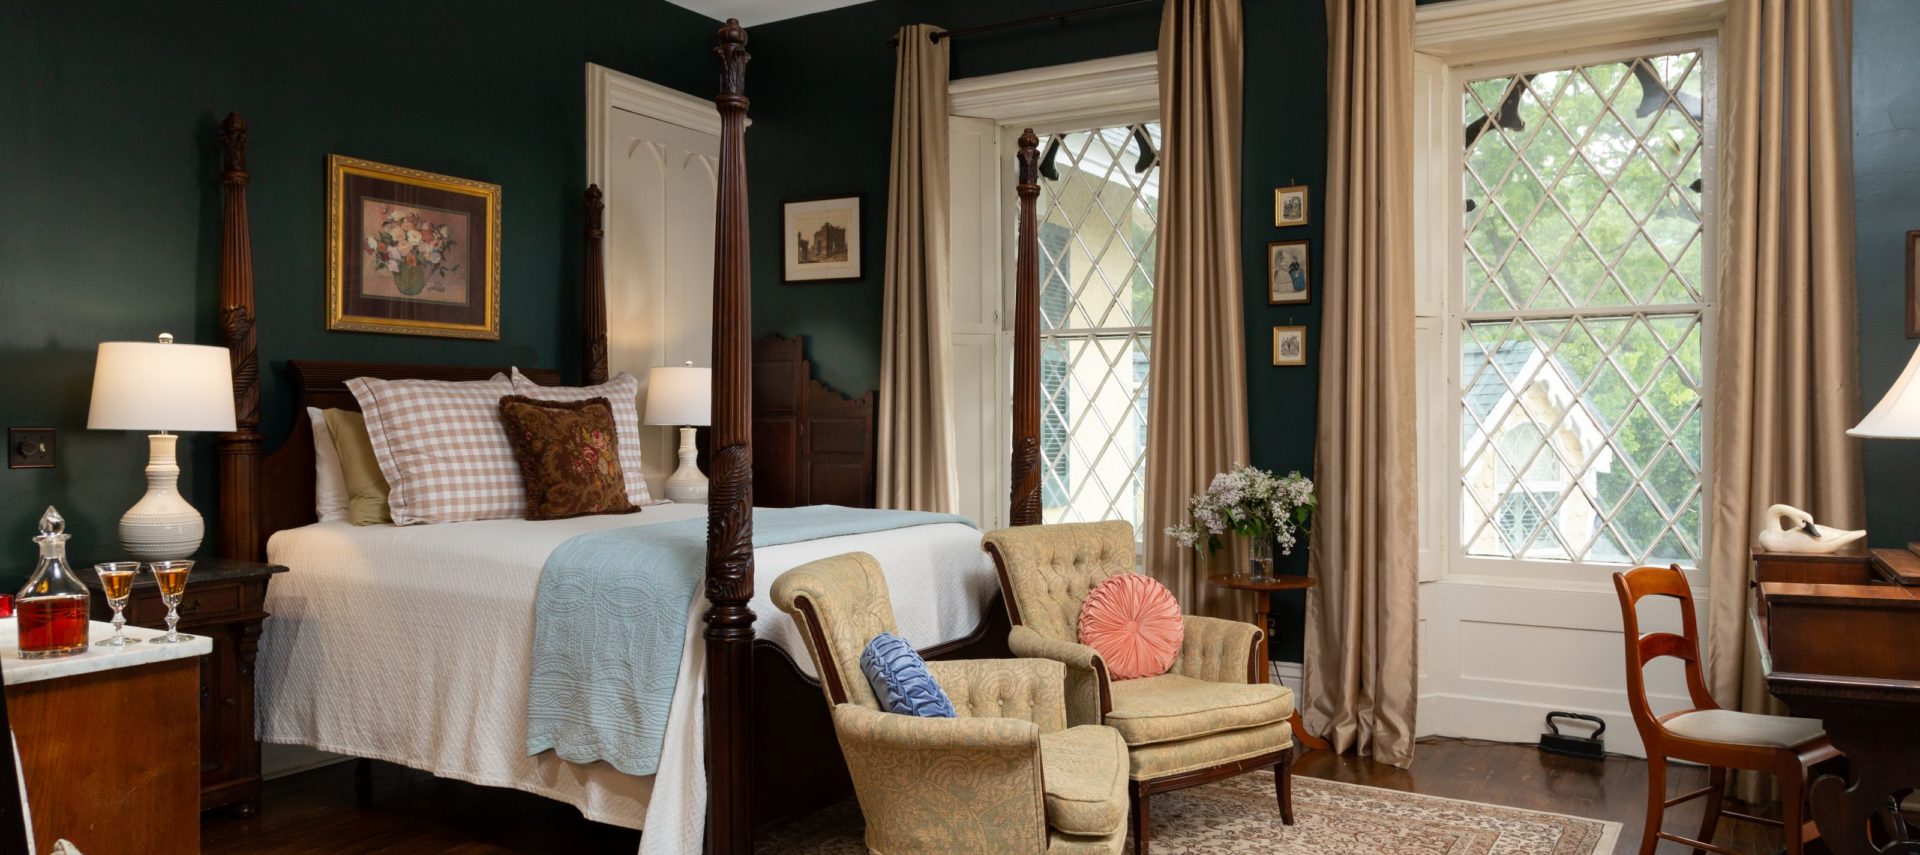 Spacious room with dark evergreen painted walls and two gothic style windows. A queen four-post bed in the center of the room with a white bedspread and decorative pillows. Two chairs sit at the foot of the bed on a large decorative area rug.